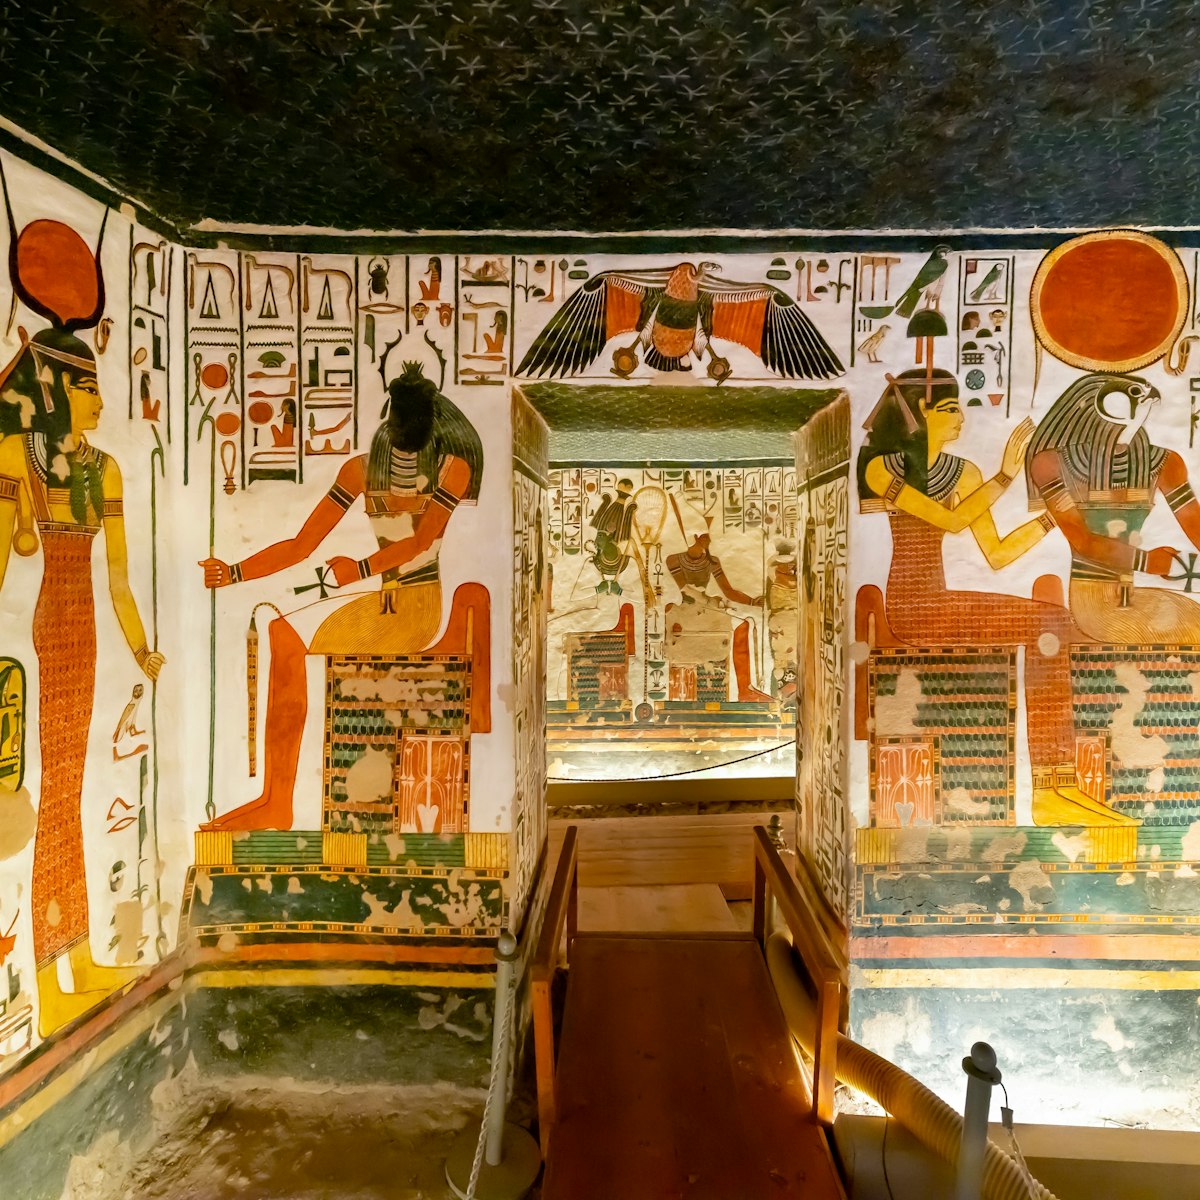 Interior view of the lower Chambers of Tomb QV66 Queen Nefertari, with Gods Hathor, Sekhmet, and Ra Horakhty visible, in the Valley of the Queens, Luxor, Egypt.